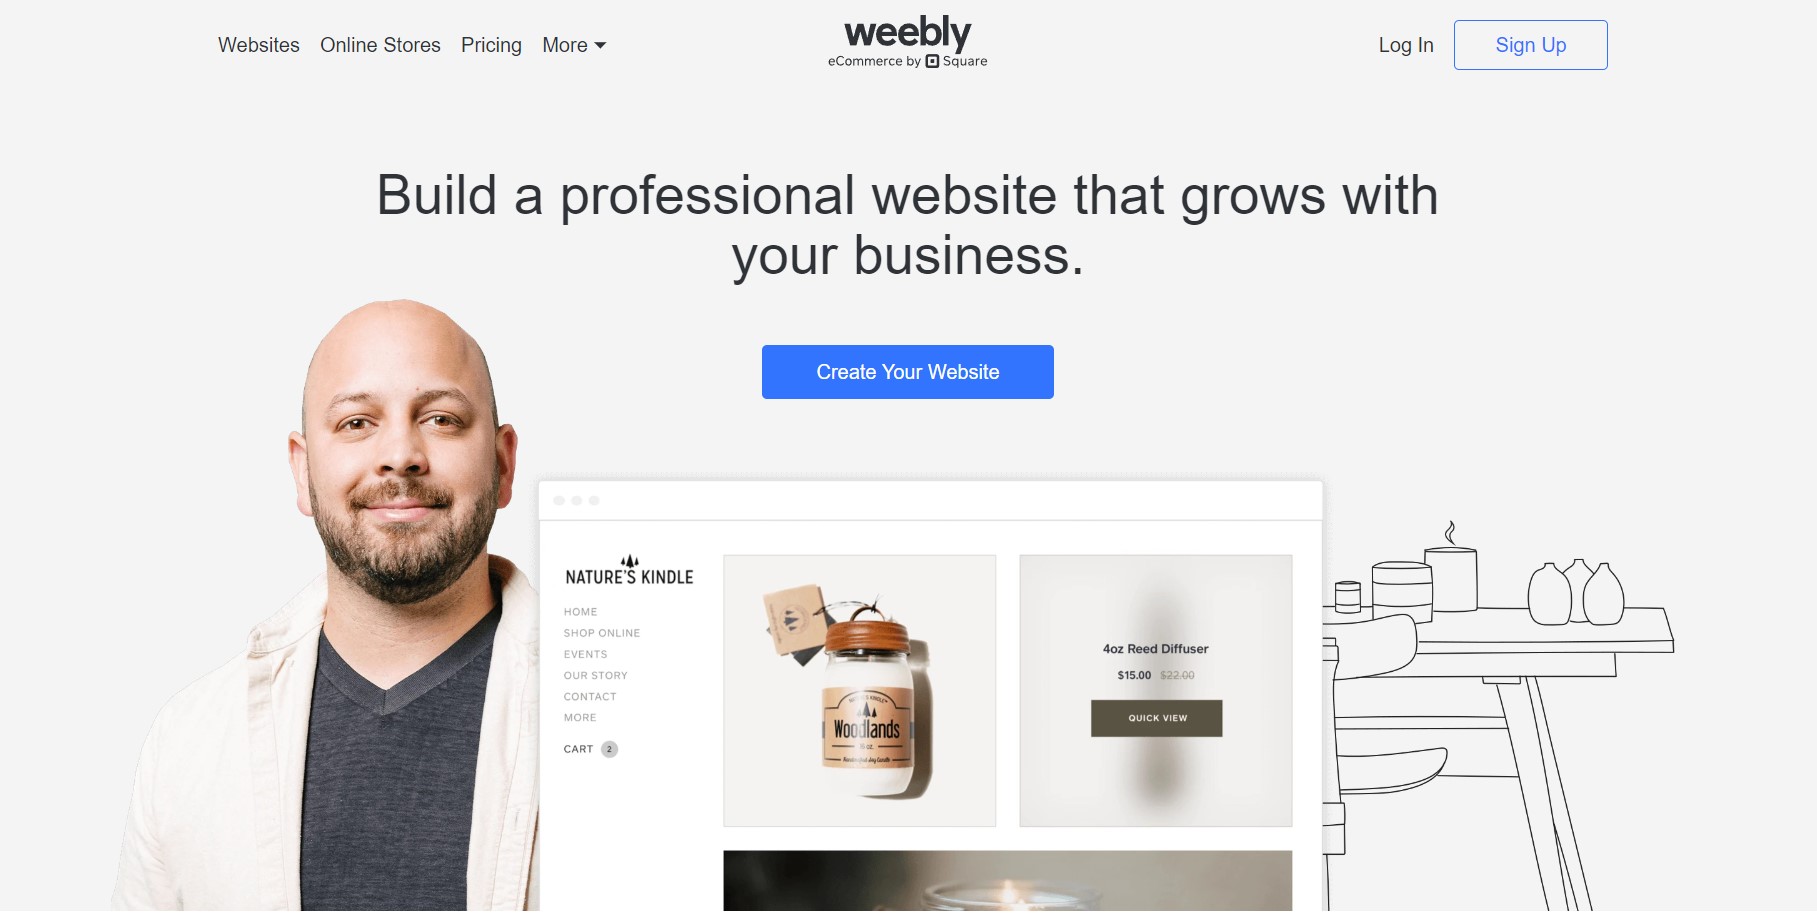 Weebly an ecommerce platform